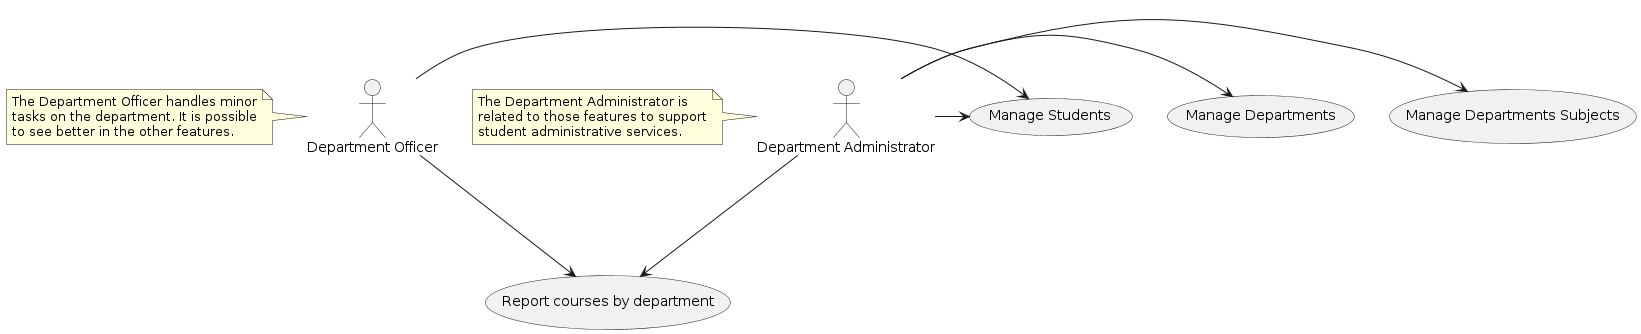 Departments use cases